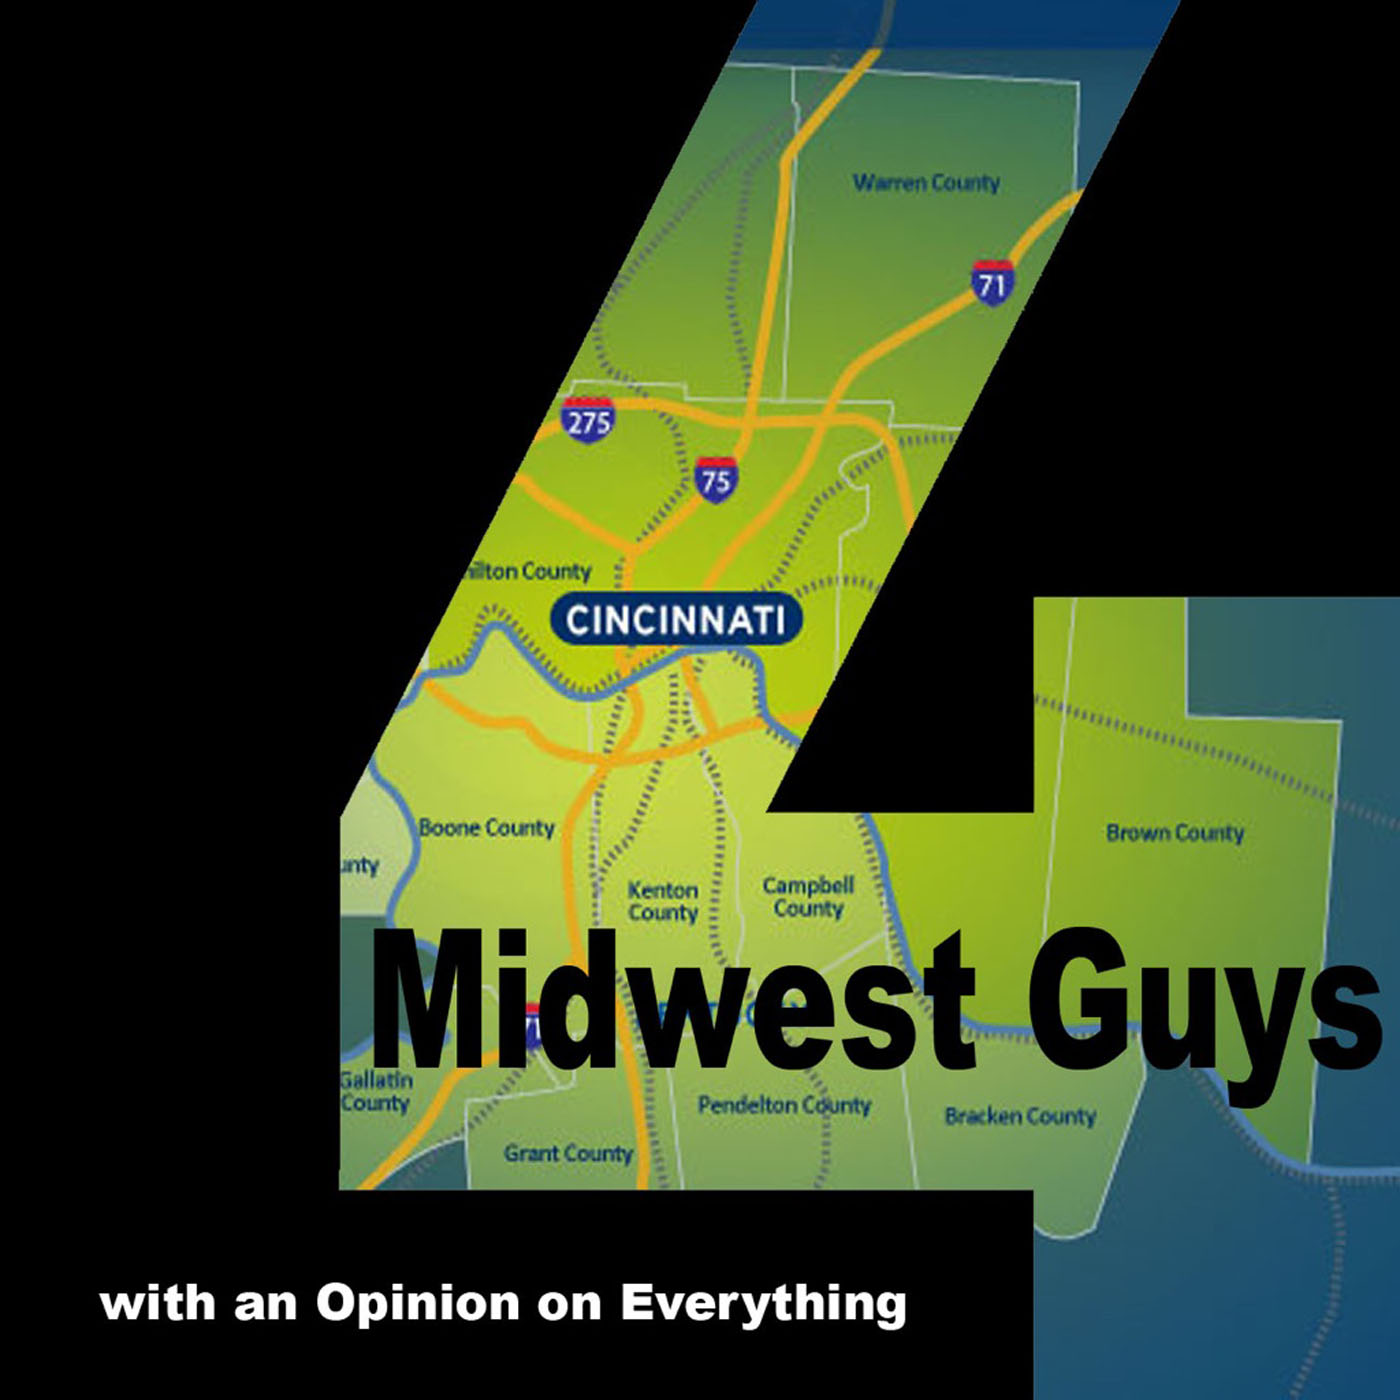 4 MIDWEST GUYS EPISODE 3